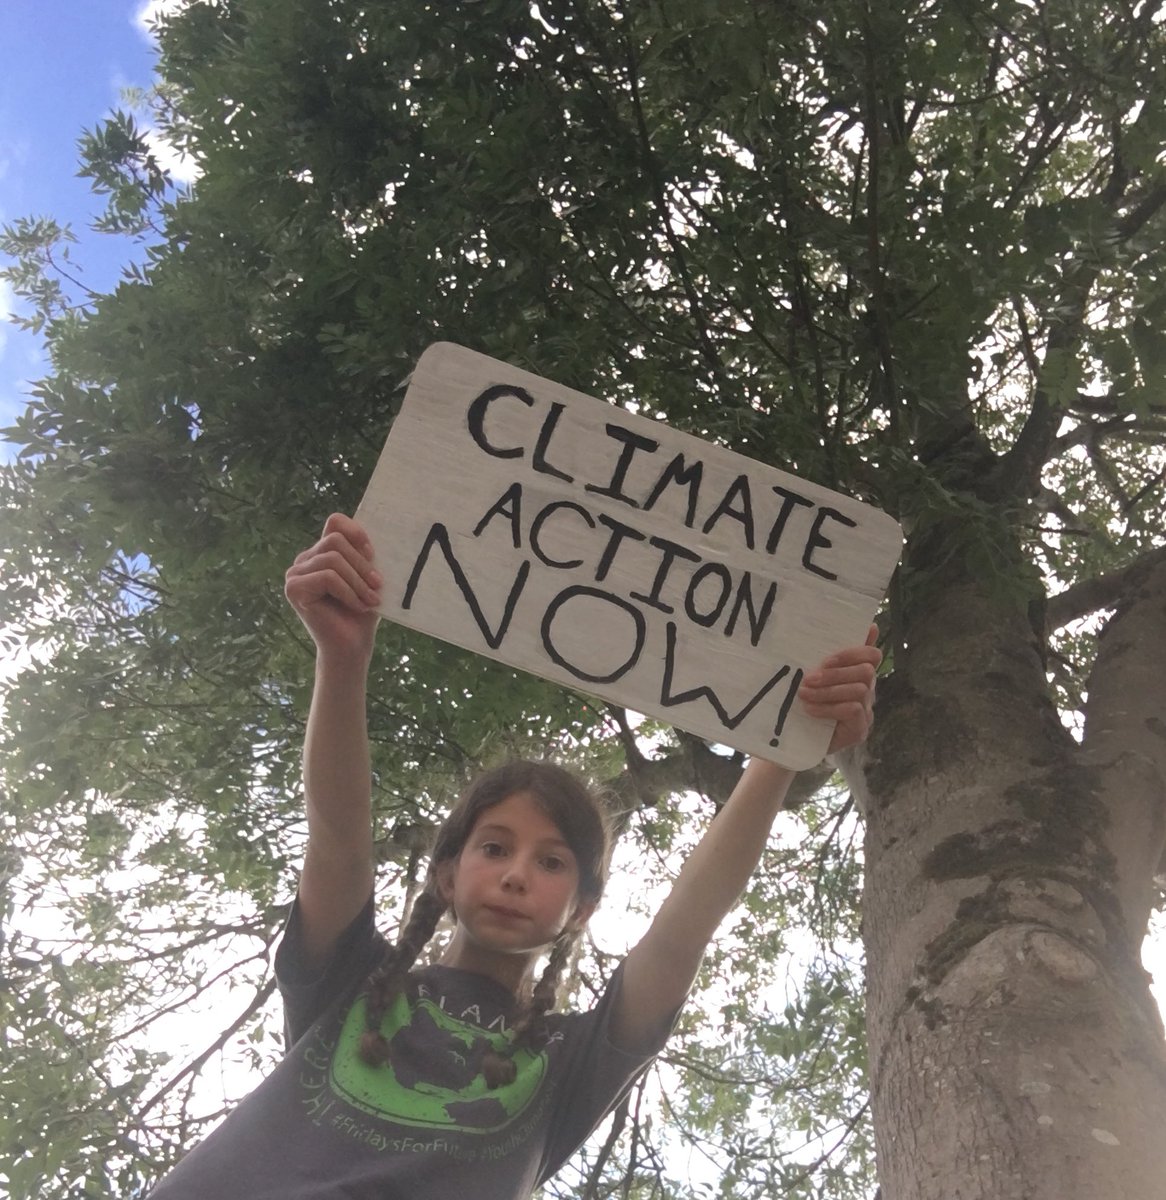 #FridaysForFuture #ClimateStrike #SchoolStrike4Climate
We will not stop fighting for a future!